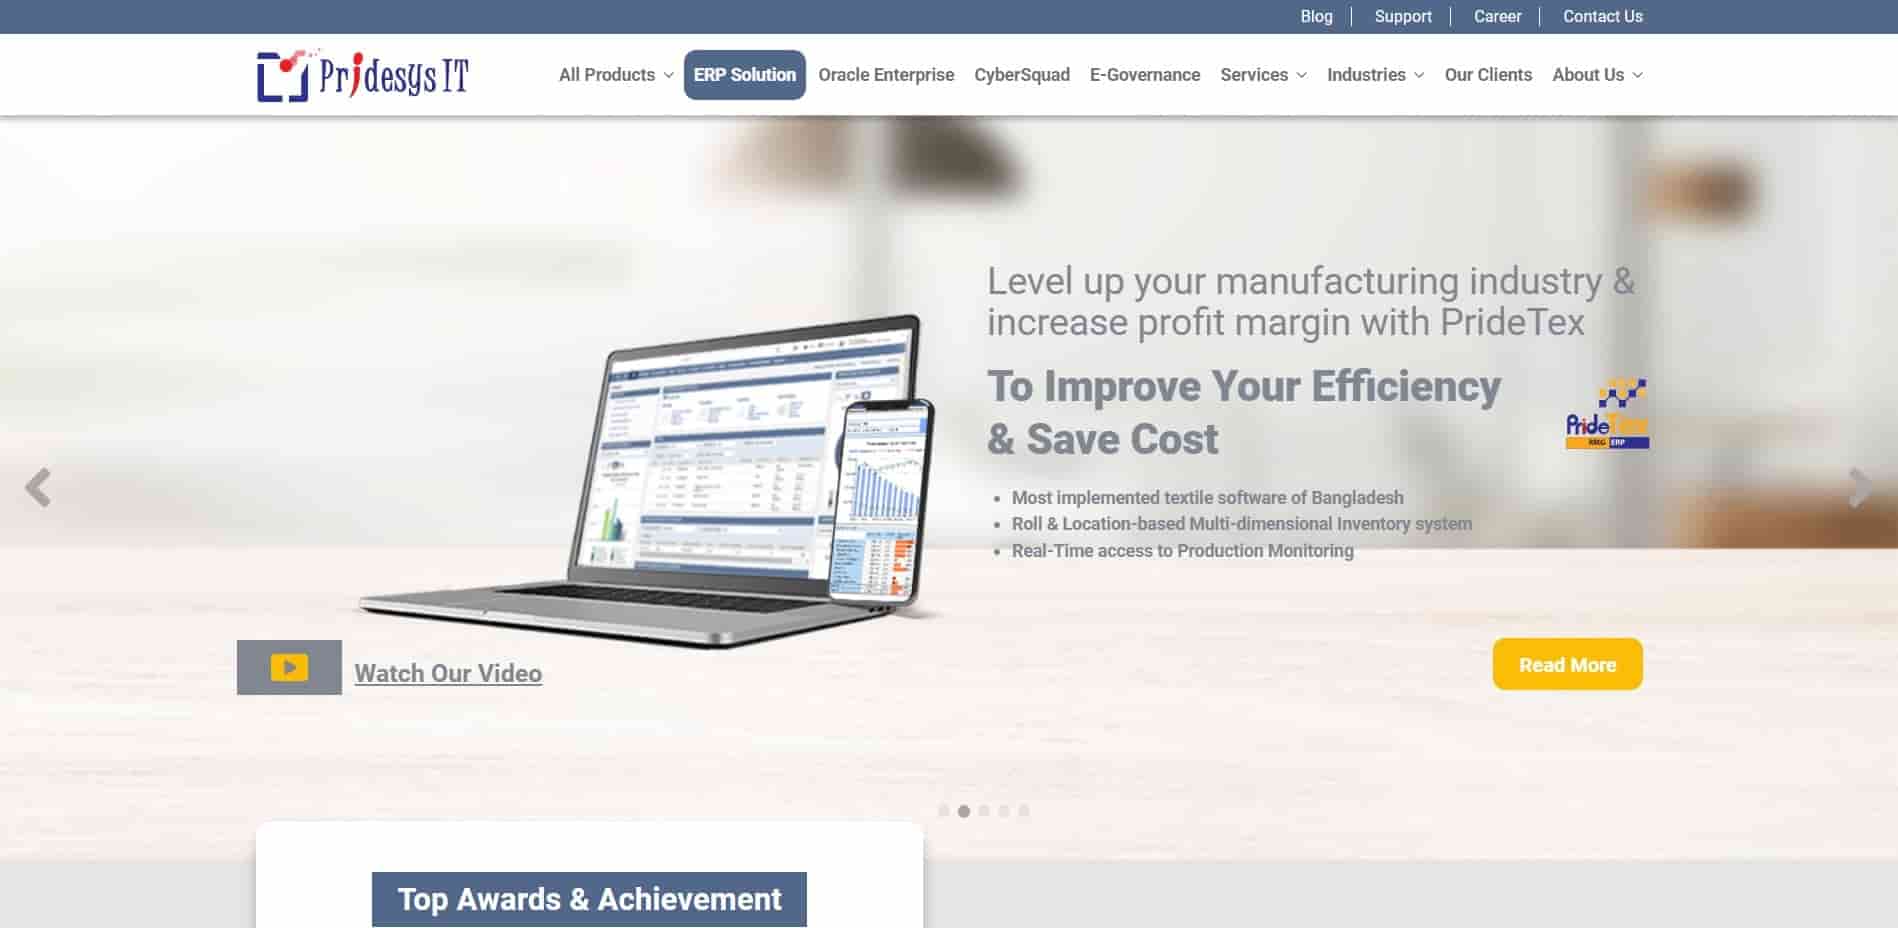 Pridesys IT homepage, where it is mentioned how they can improve efficiency and save cost using software from Bangladesh.